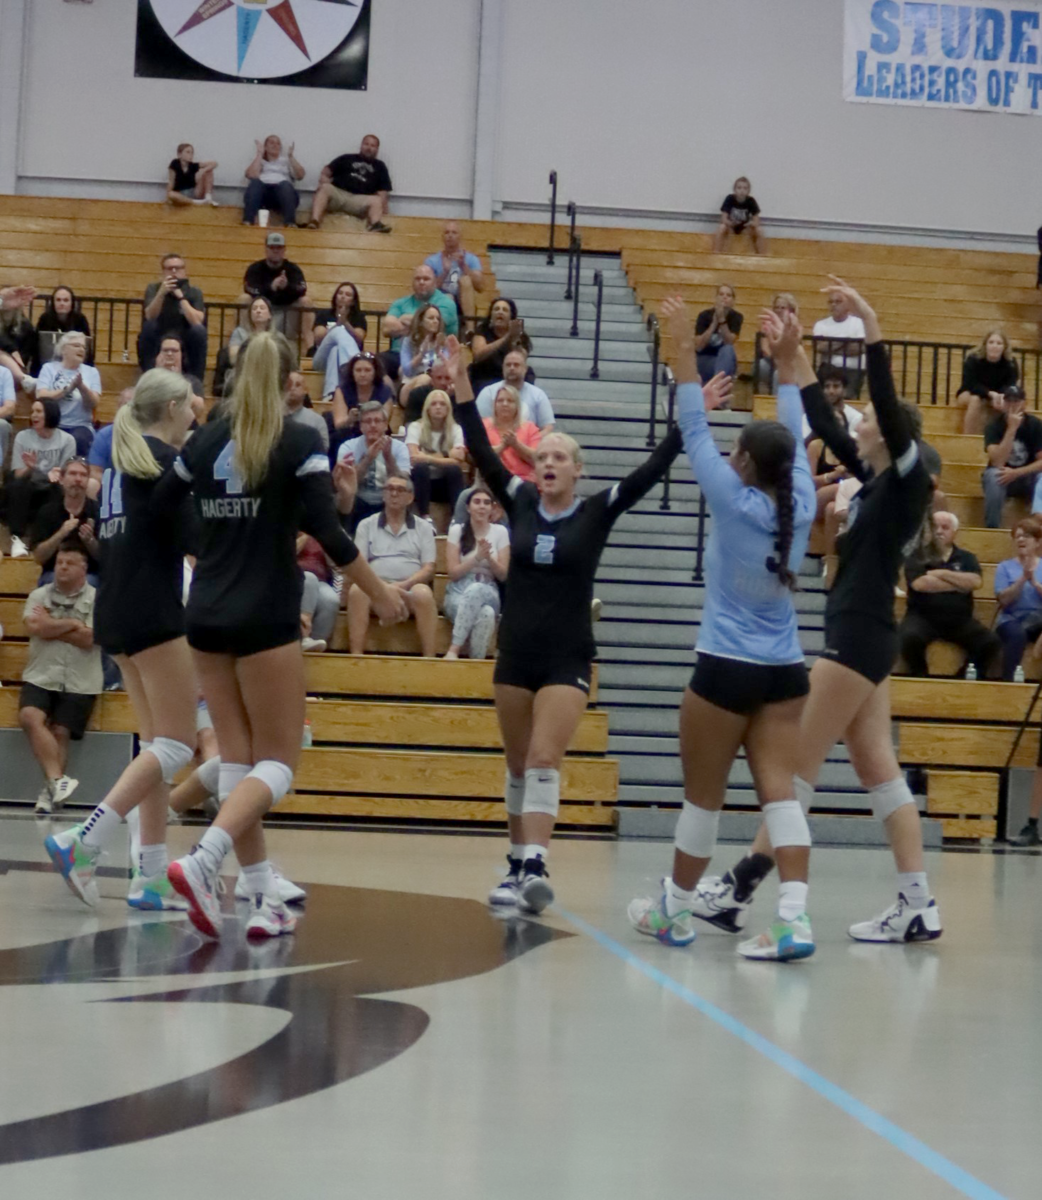 The team celebrates after getting the point. Hagerty won the third match 25-13.